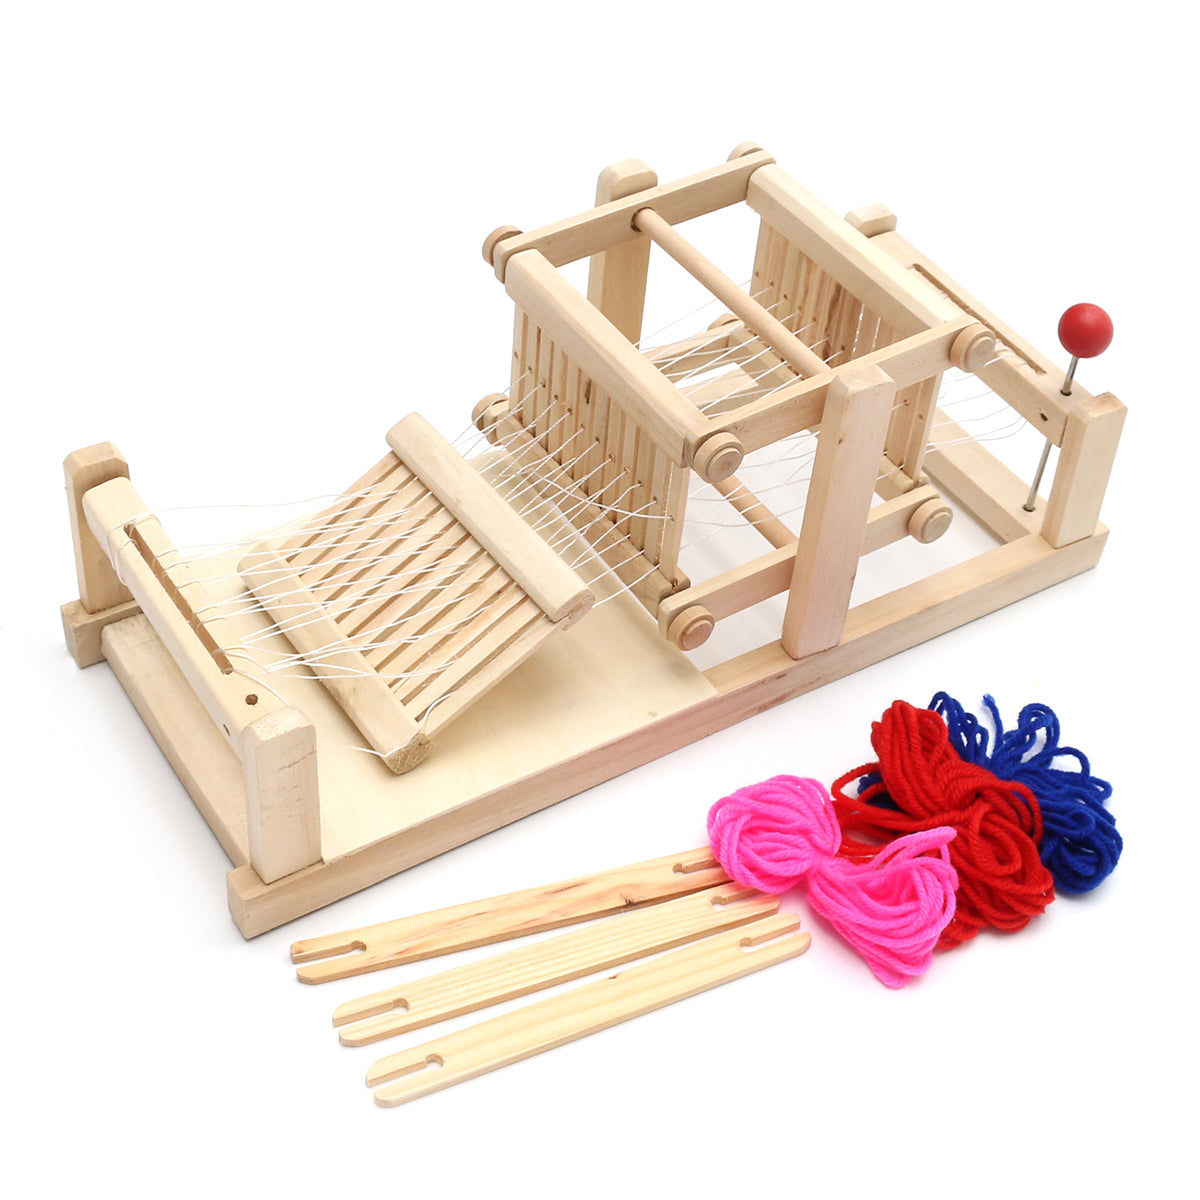 DIY Brocaded Enginery Chinese Traditional Wooden Table Weaving Loom Machine Model Handicraft Toy 